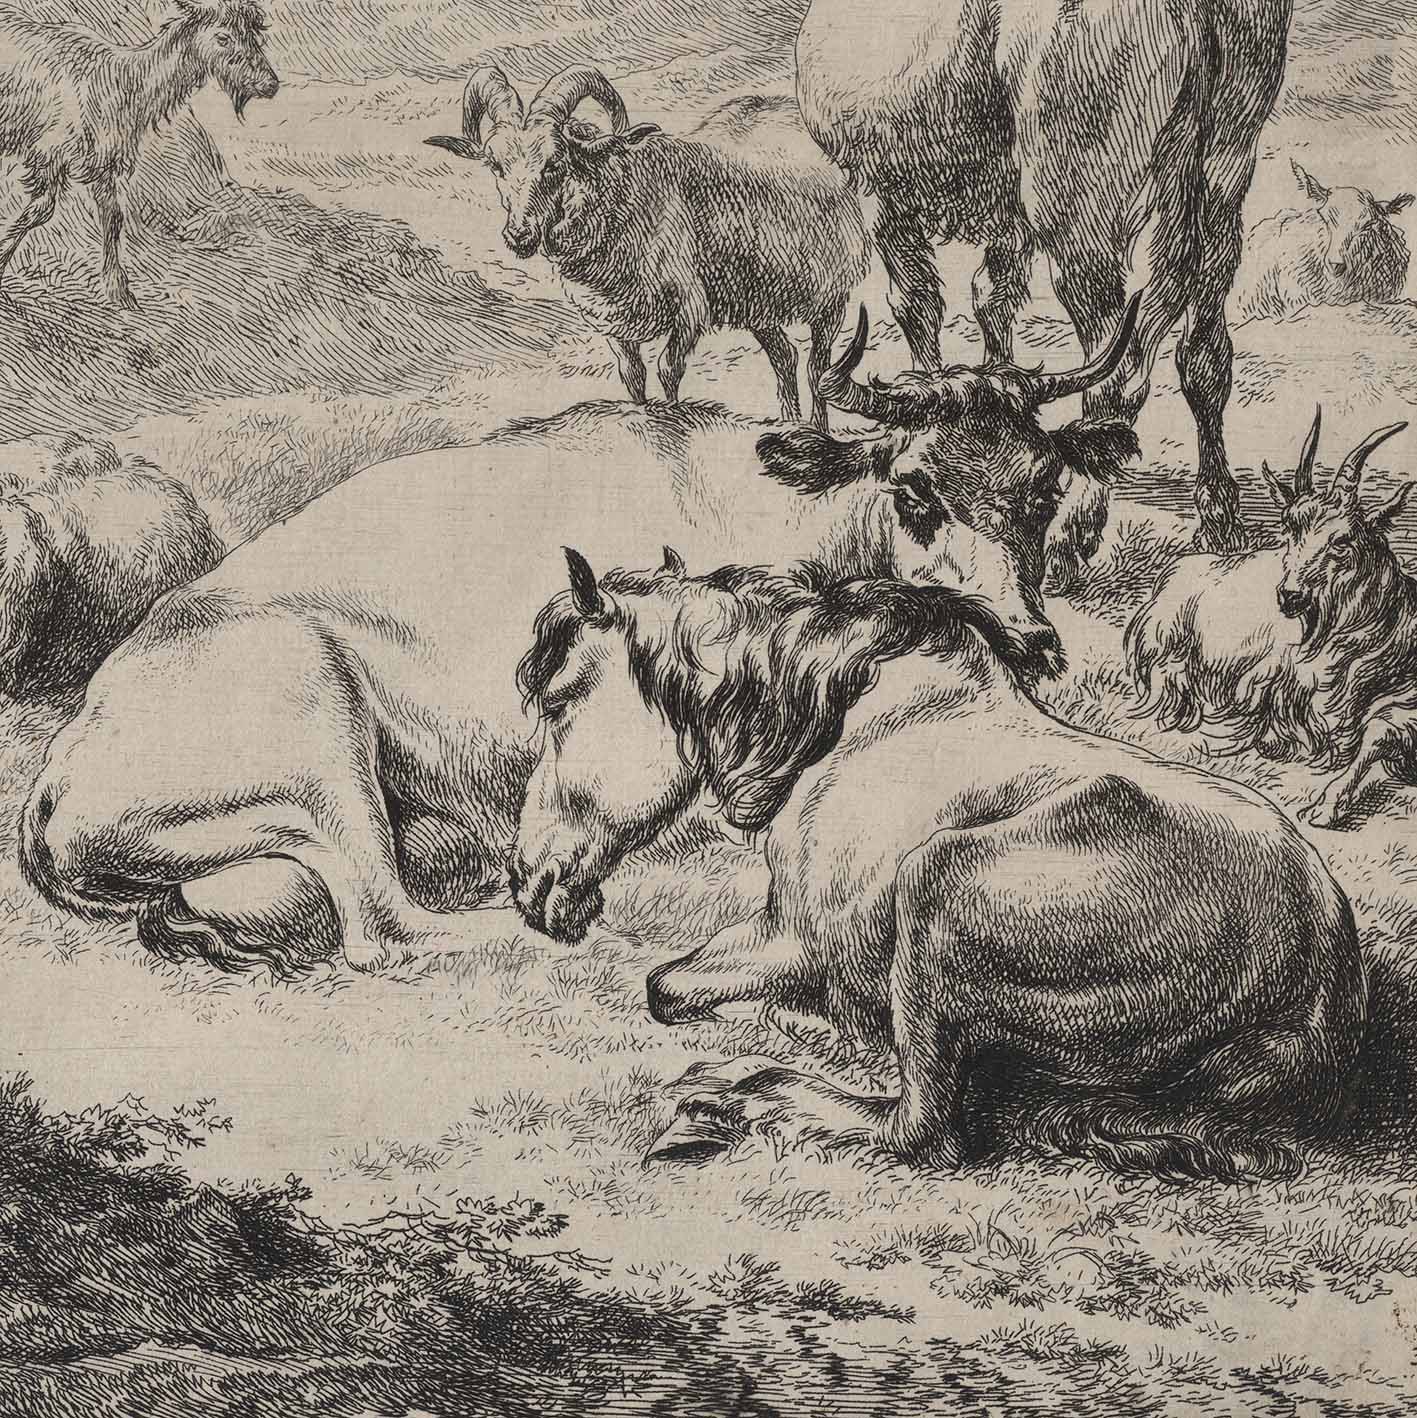 Prints and Principles: Nicolaes Berchem’s etching, “The Resting Herd ...